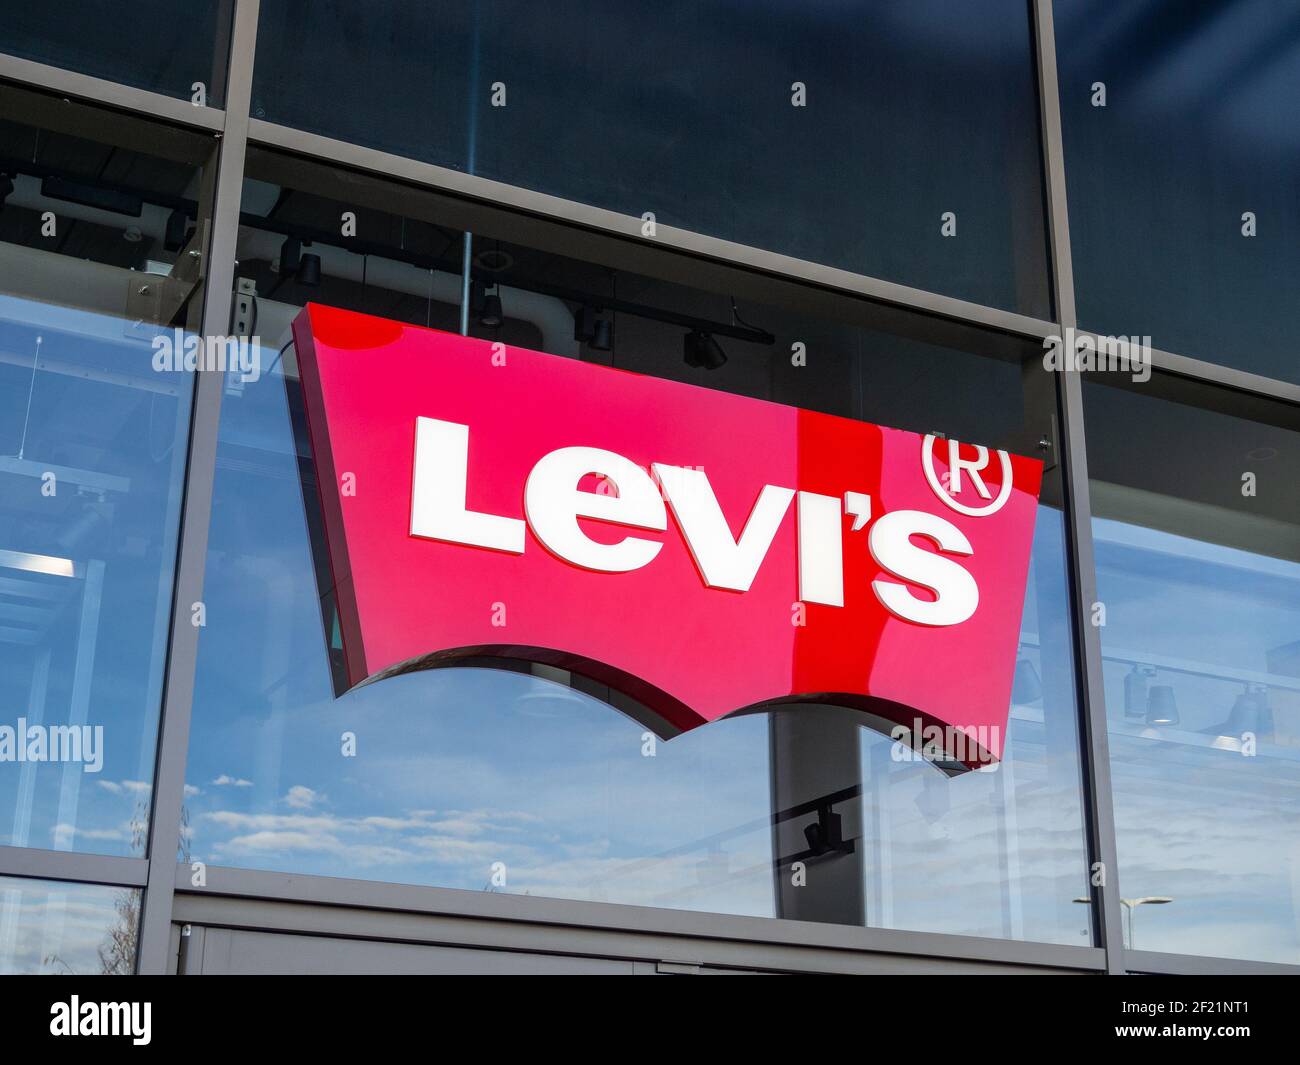 Levis Store High Resolution Stock Photography and Images - Alamy